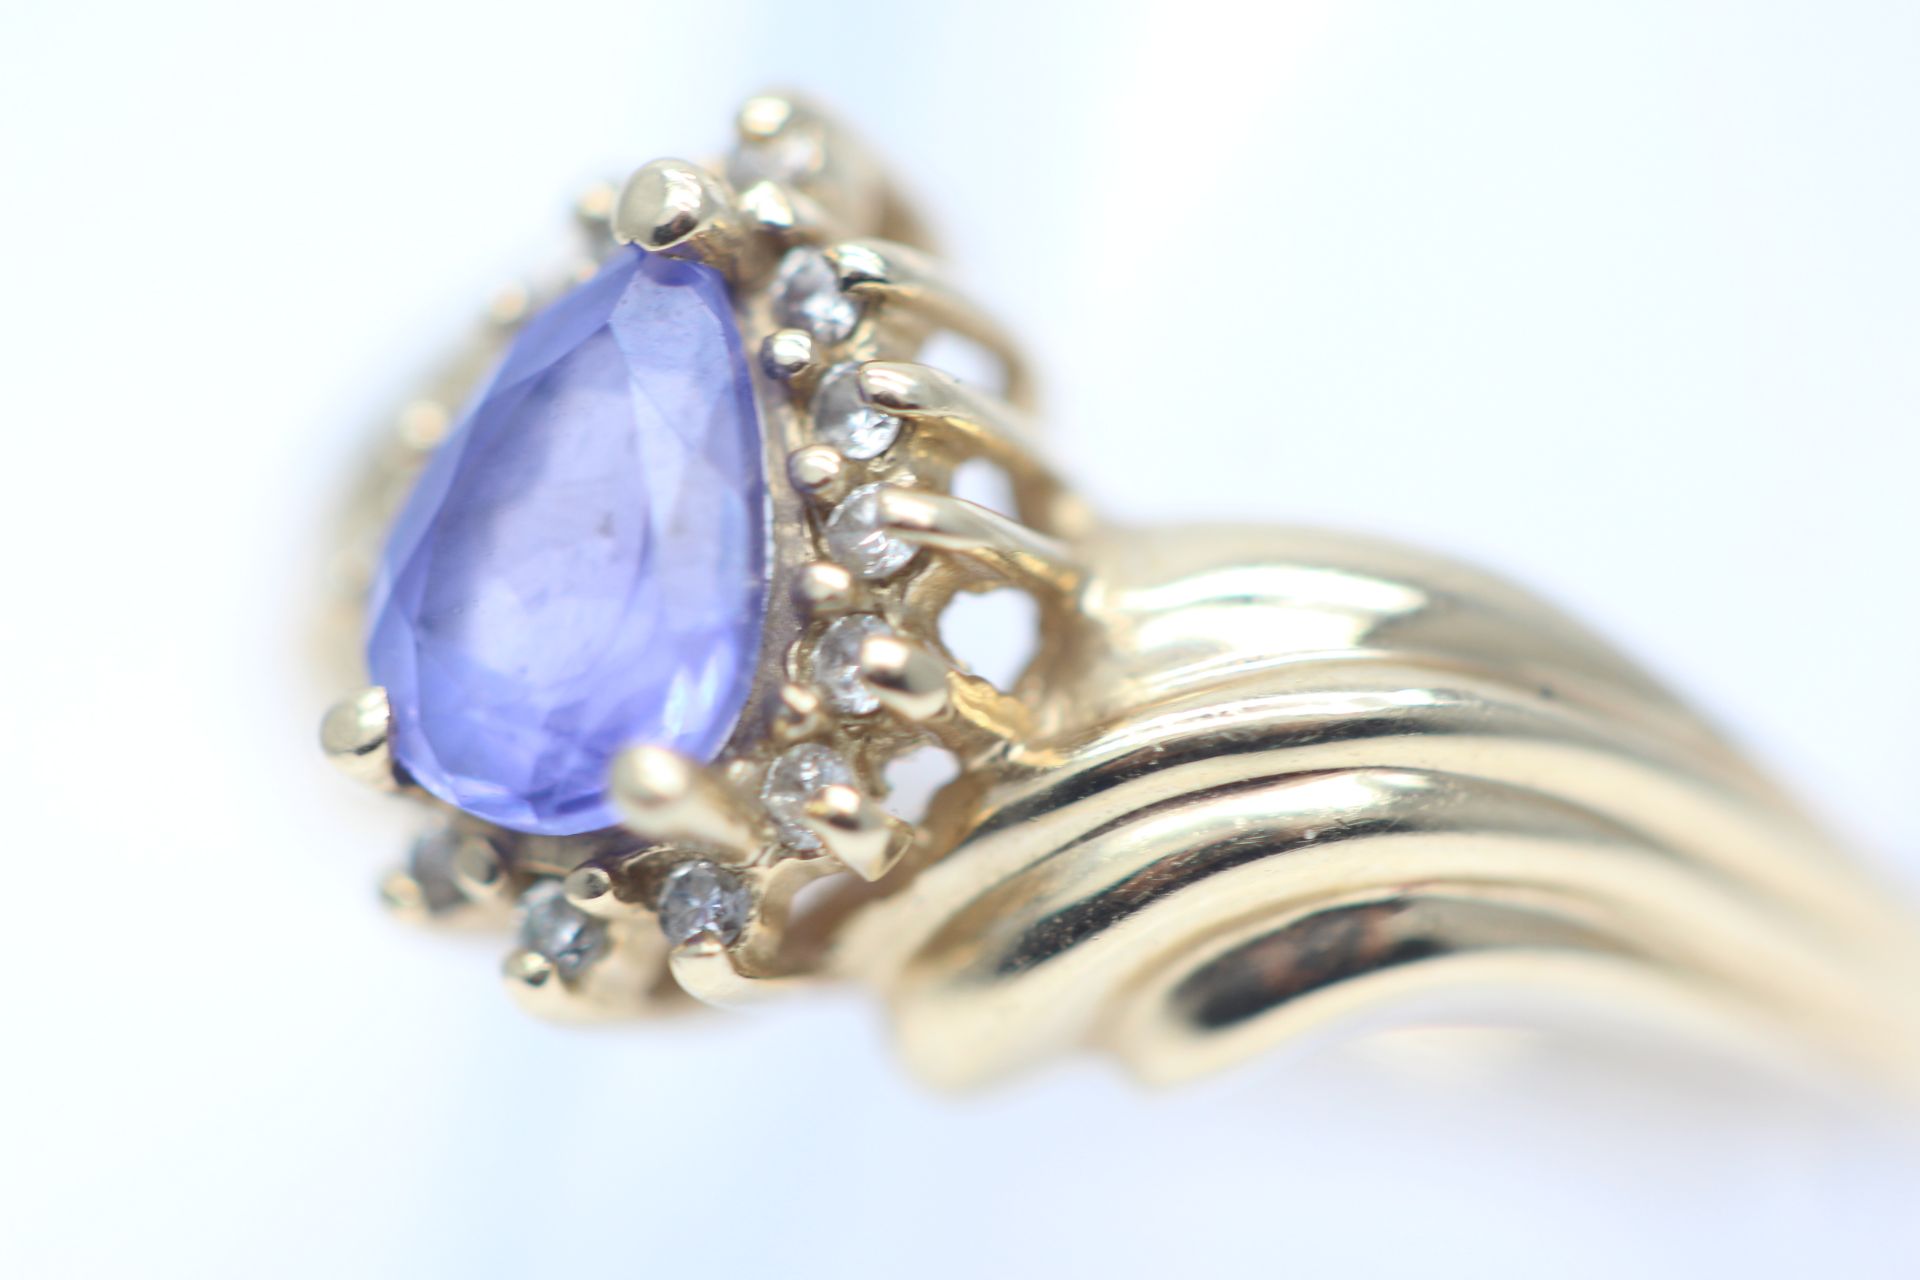 SOLID YELLOW GOLD LADIES RING SET WITH SINGLE STONE PEAR CUT 1.00 CARAT TANZANITE STONE WITH - Image 2 of 2